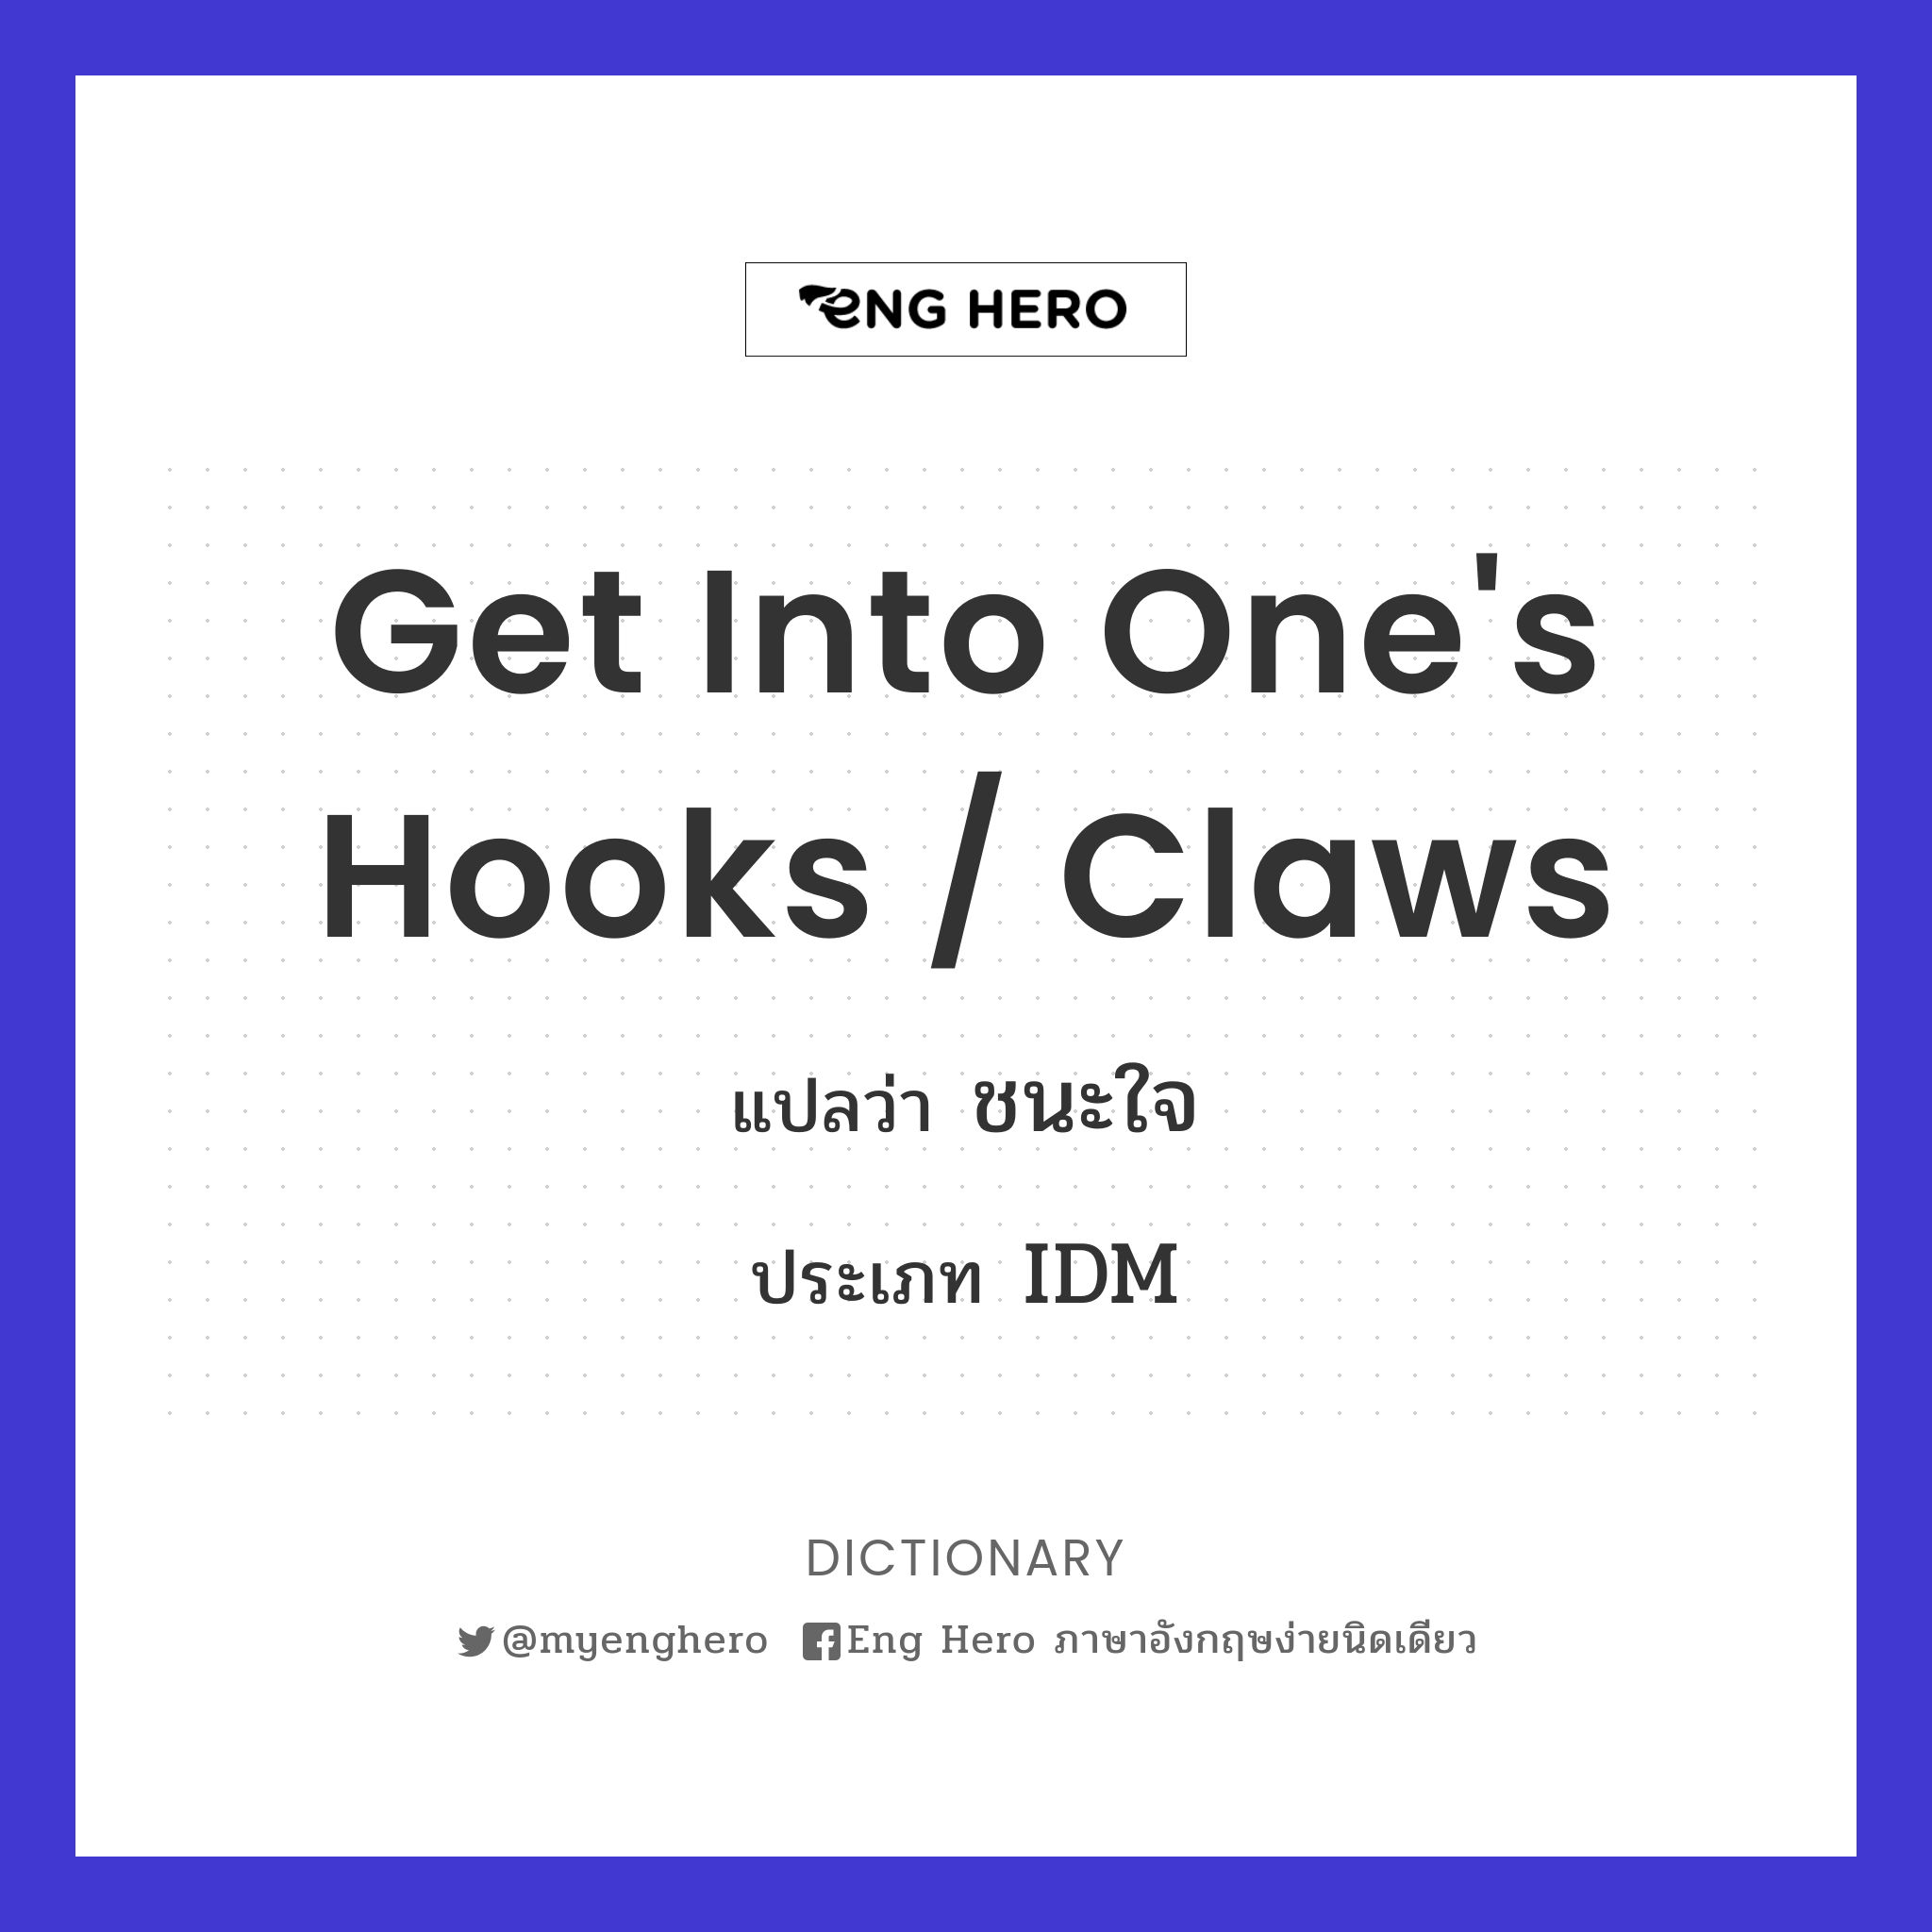 get into one's hooks / claws